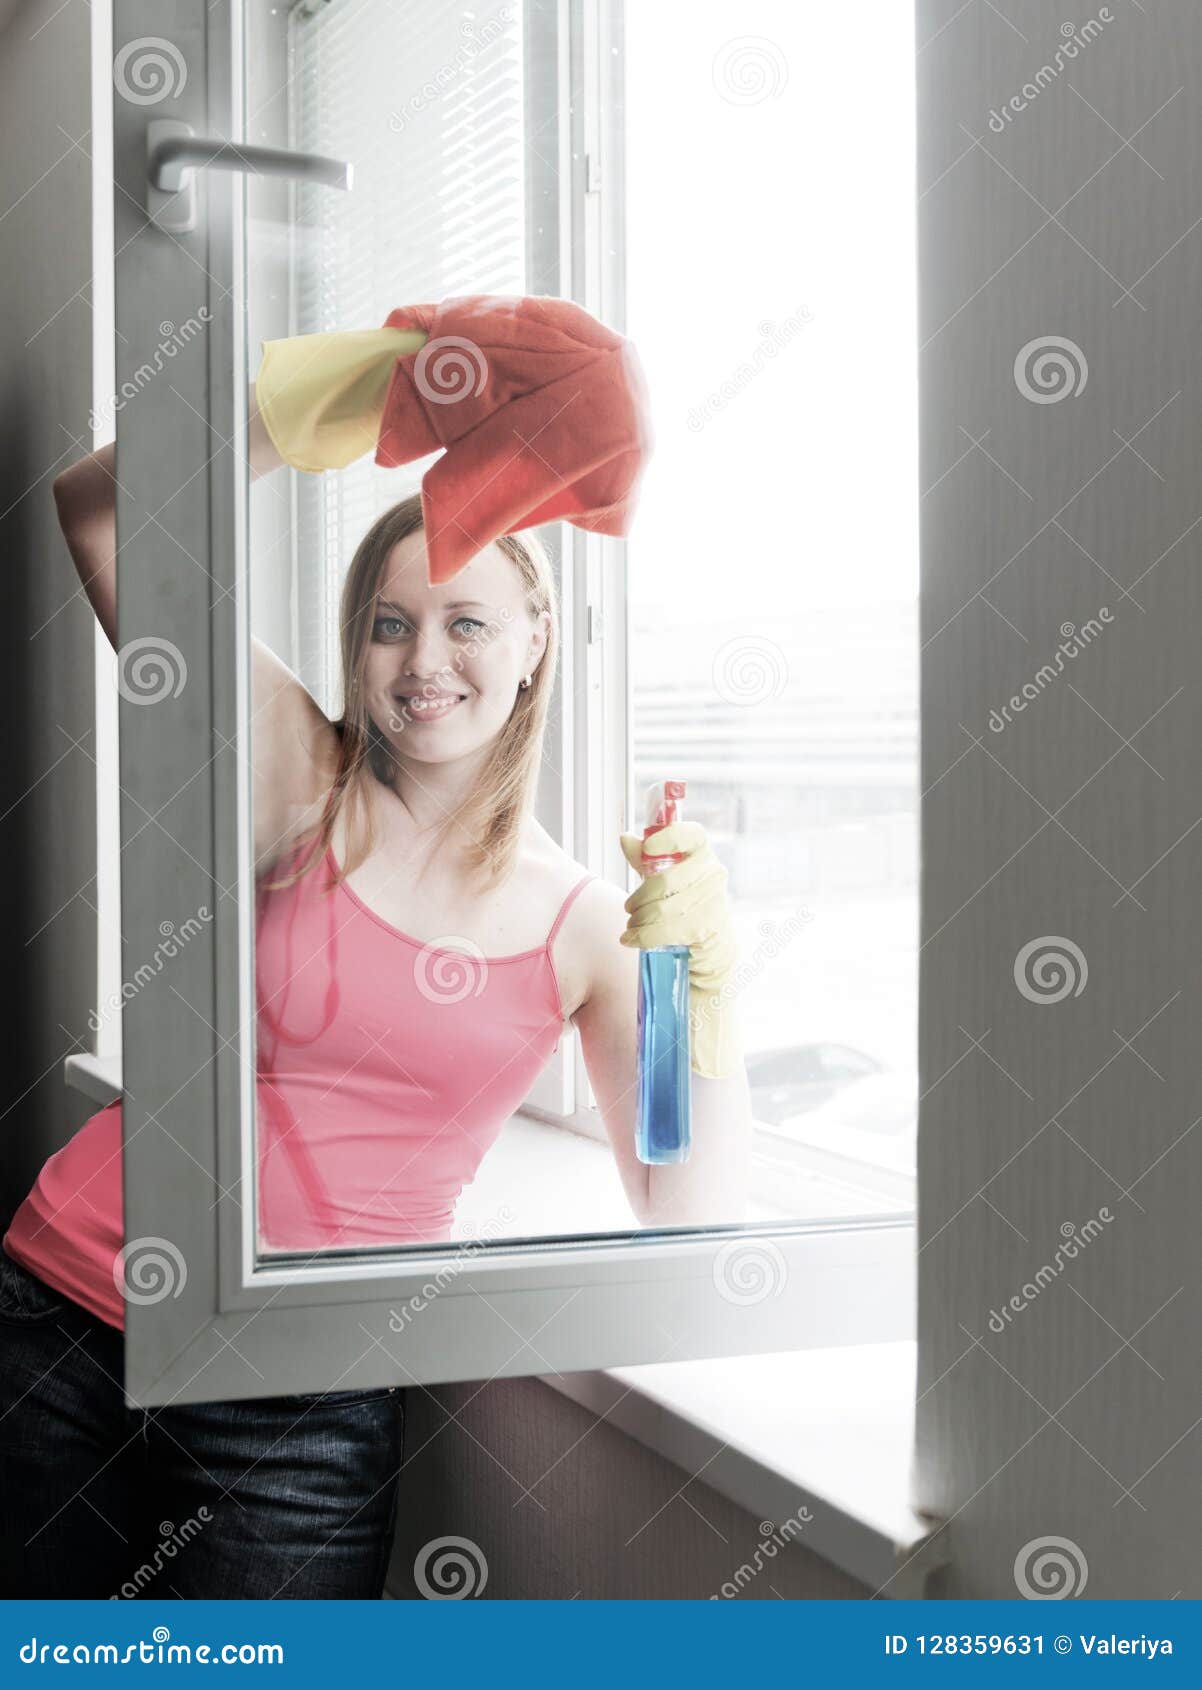 Woman Housewife Washes A Window Stock Image Image Of Woman Domestic 